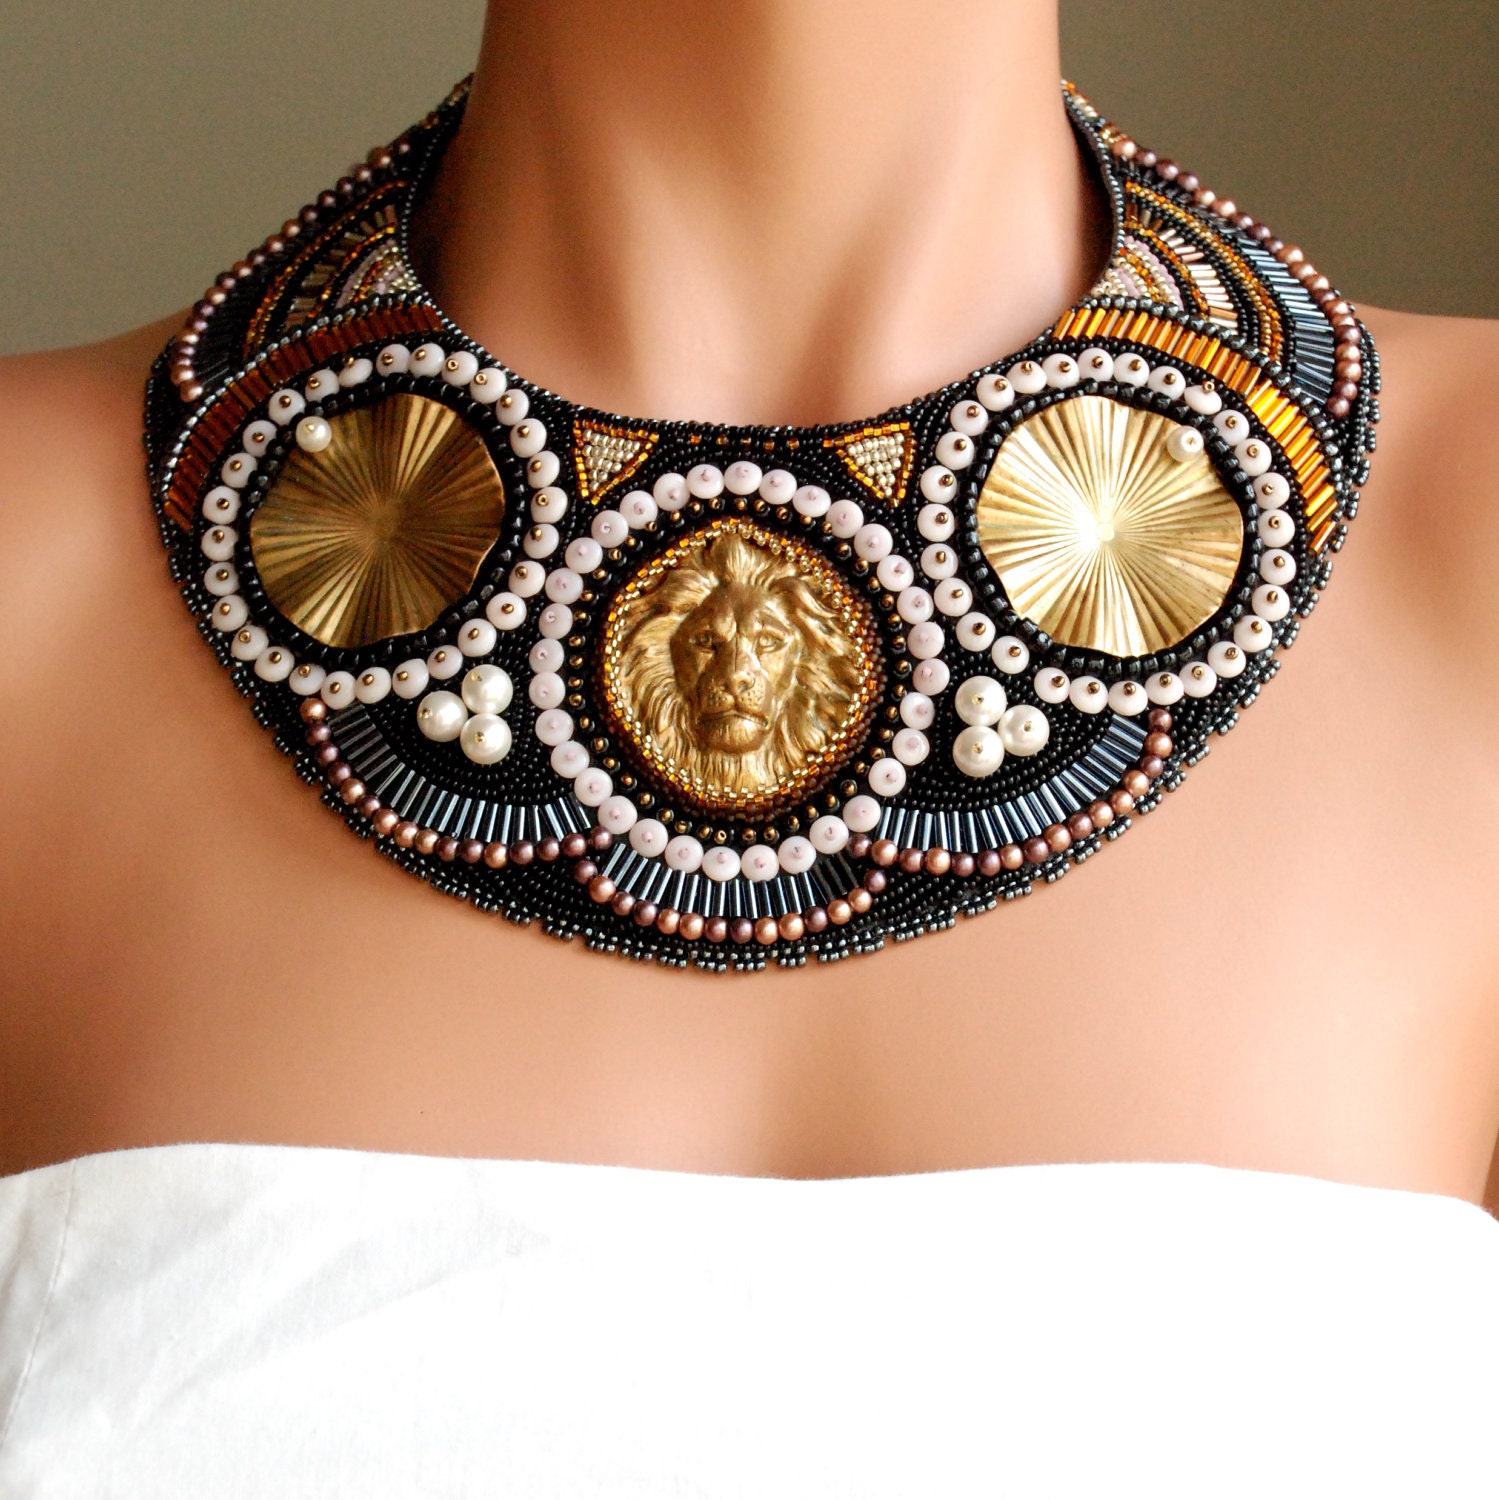 Diana's Companion - Large Statement Collar Necklace, Bead Embroidered, Geometric in Black and Neutral Colored Glass, Roman Lion